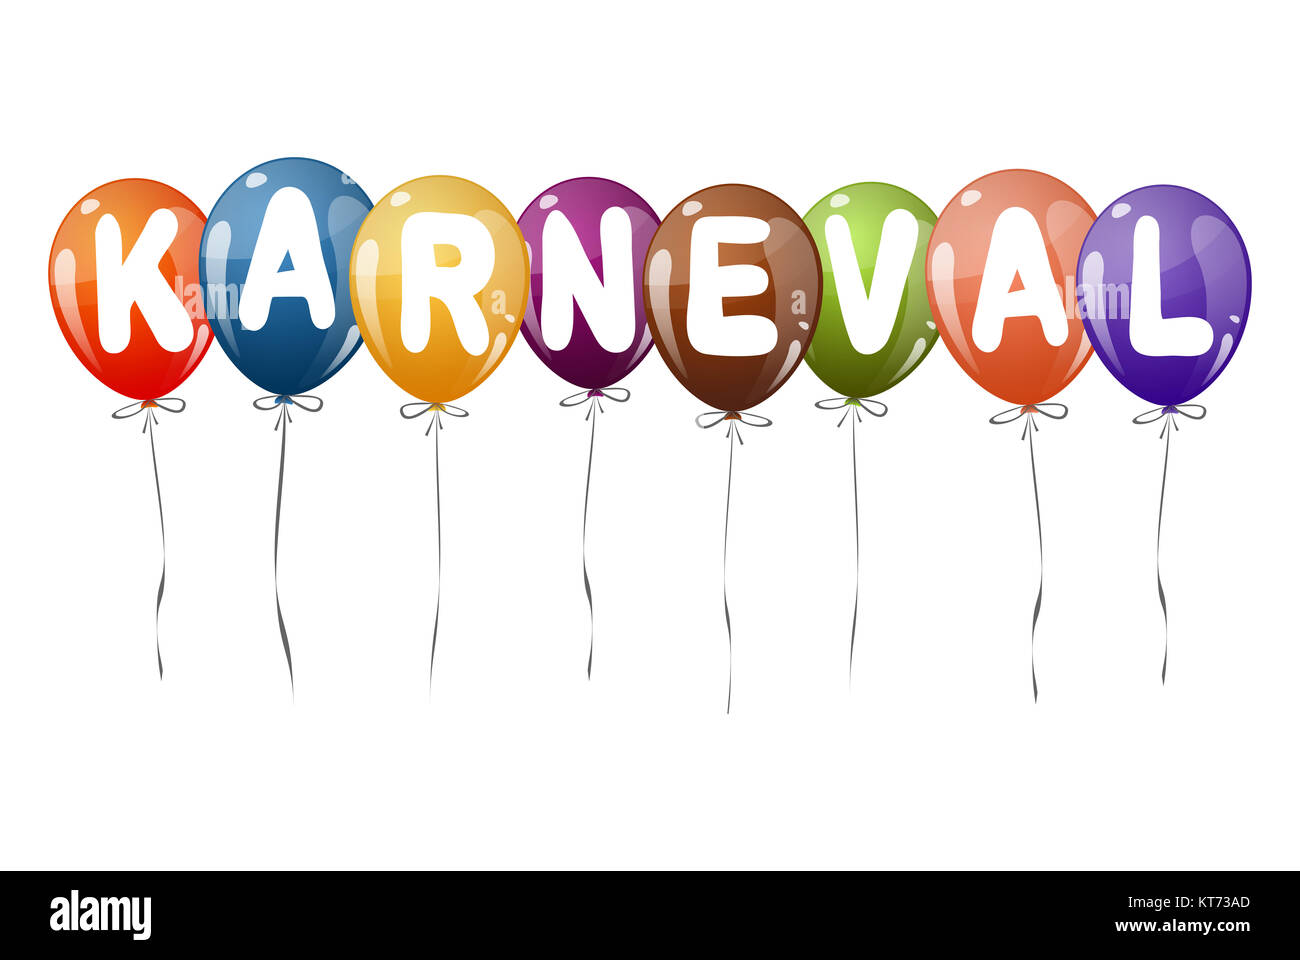 background with different colored balloons for carnival time Stock Photo